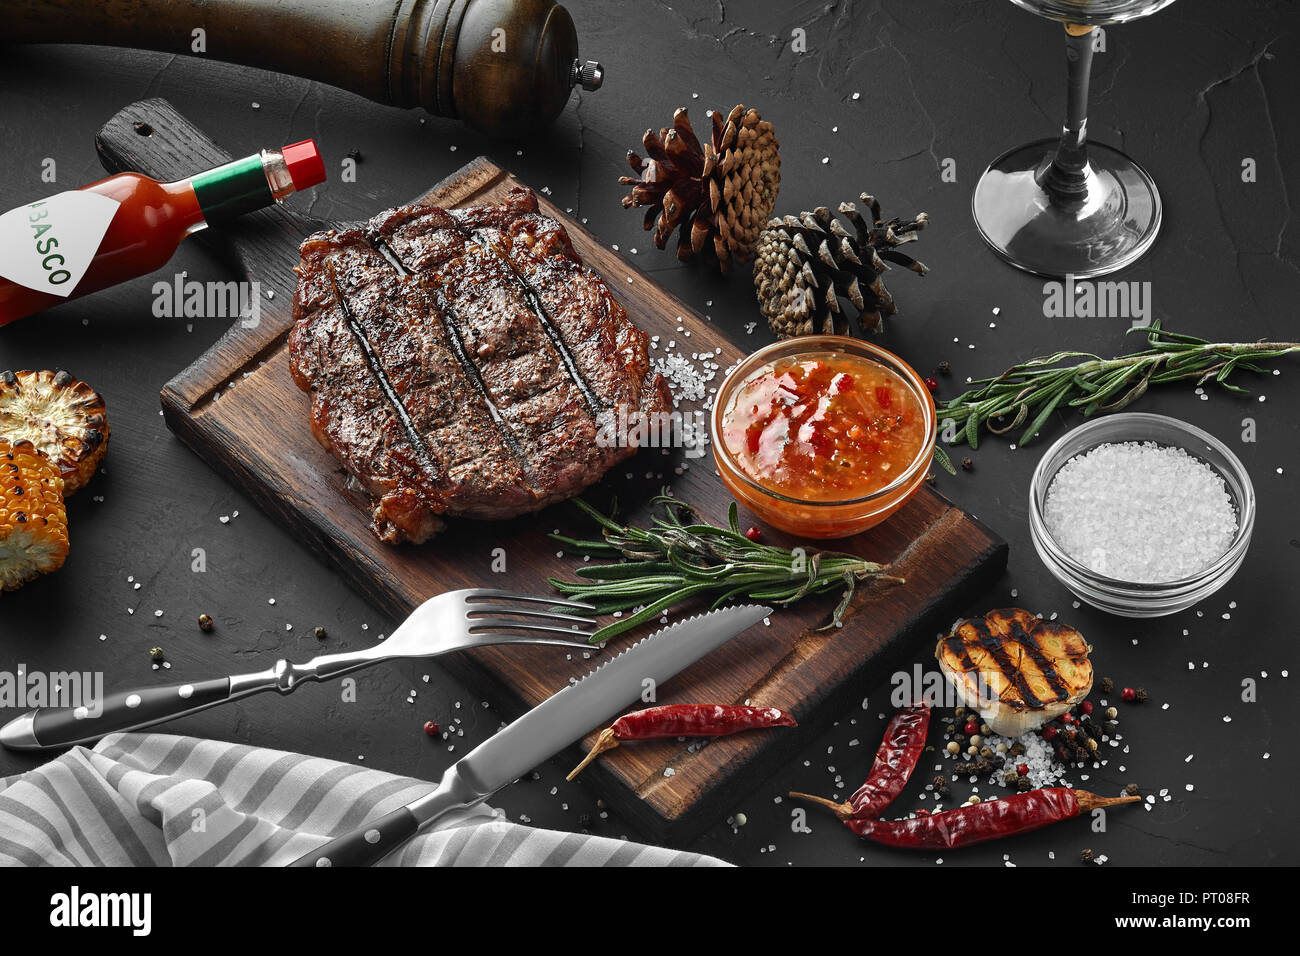 Medium rare grilled Steak Ribeye with corn and garlic on serving board block on black background. Top view. Still life. Flat lay Stock Photo